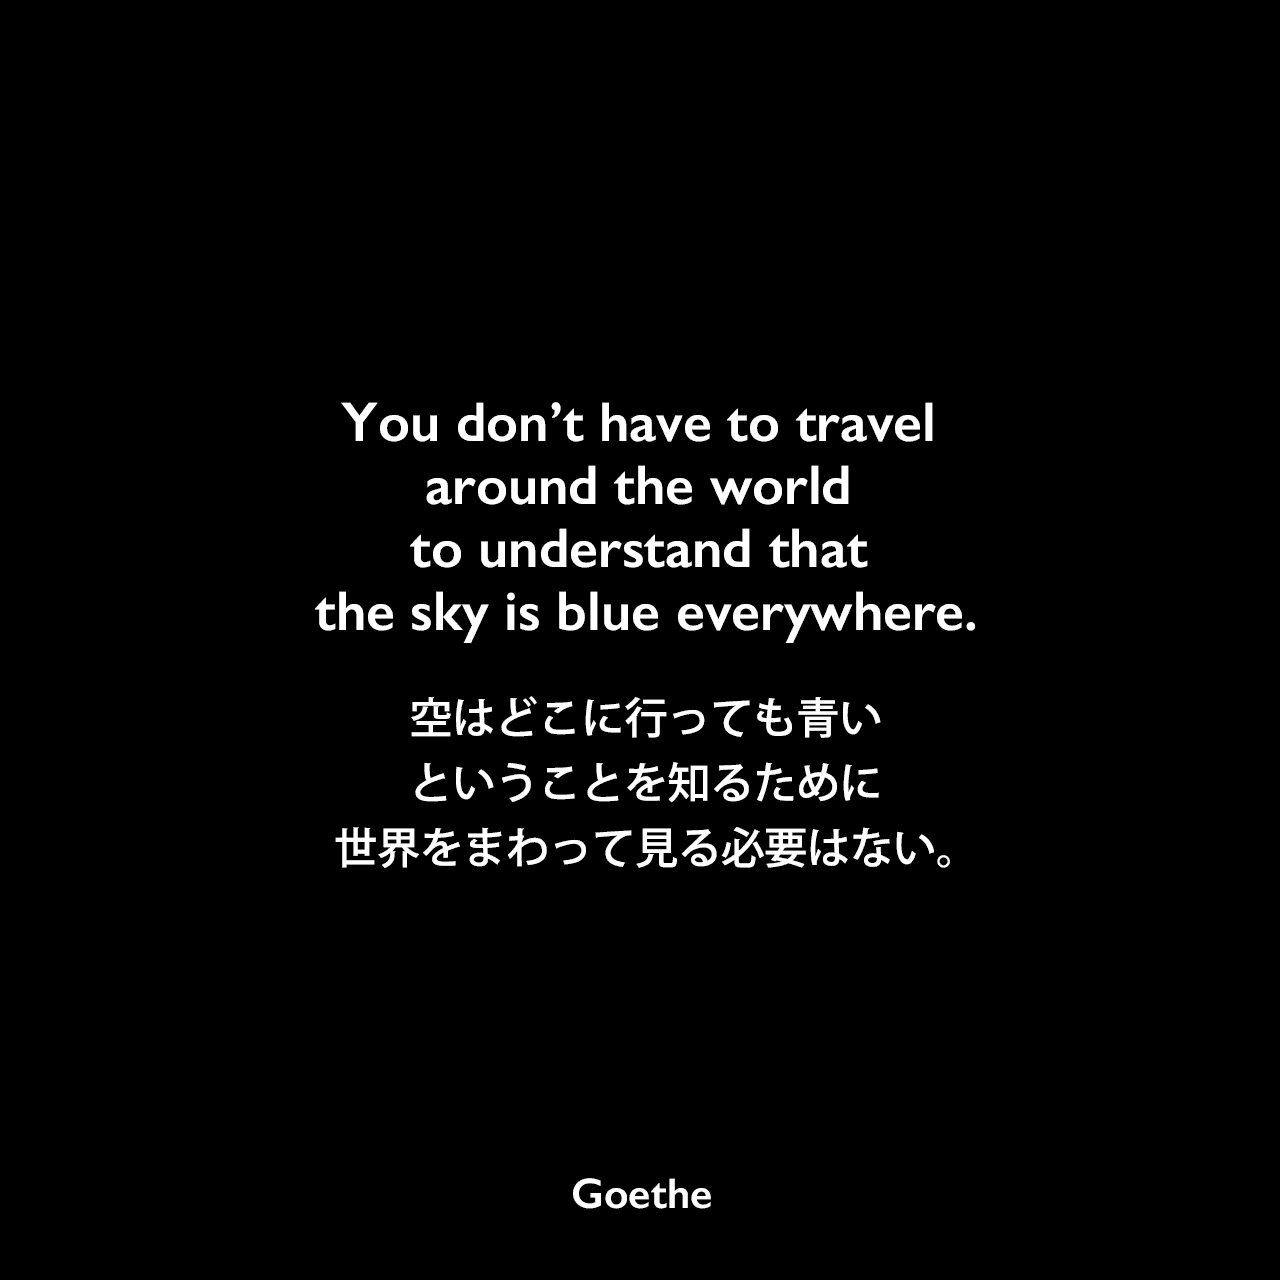 You don’t have to travel around the world to understand that the sky is blue everywhere.空はどこに行っても青いということを知るために、世界をまわって見る必要はない。Johann Wolfgang von Goethe